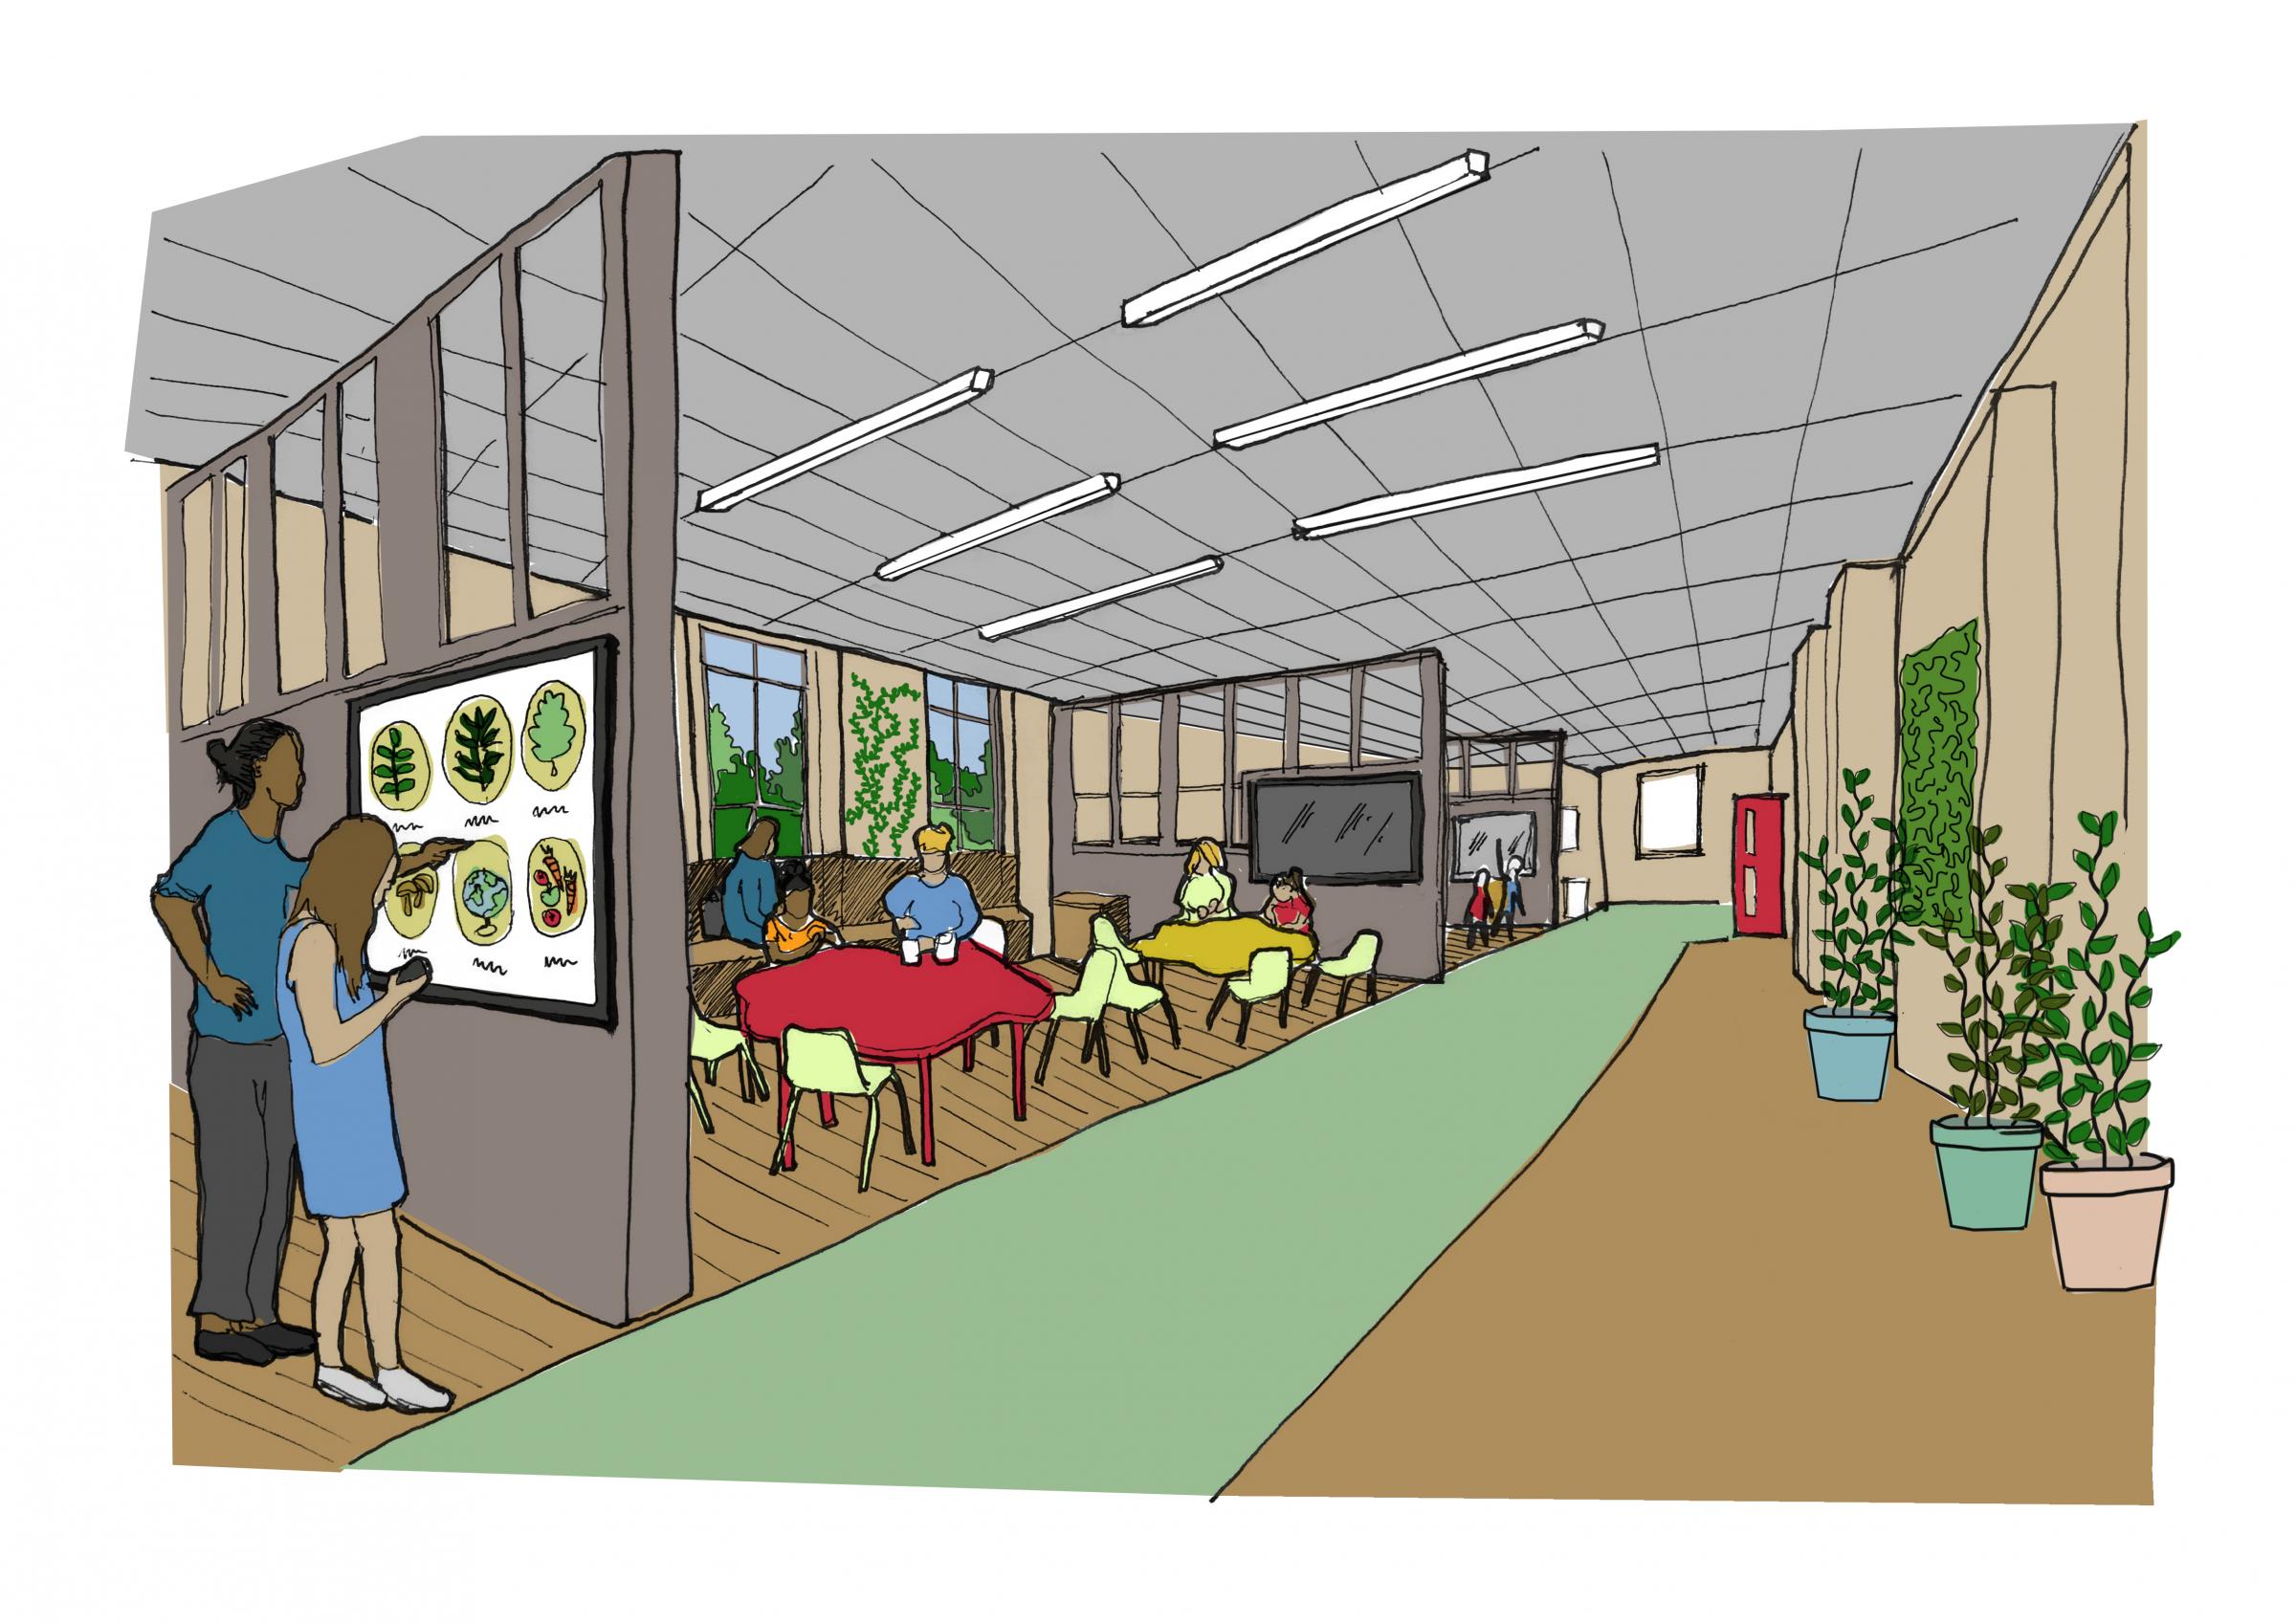 Image of how the inside of the school could look.